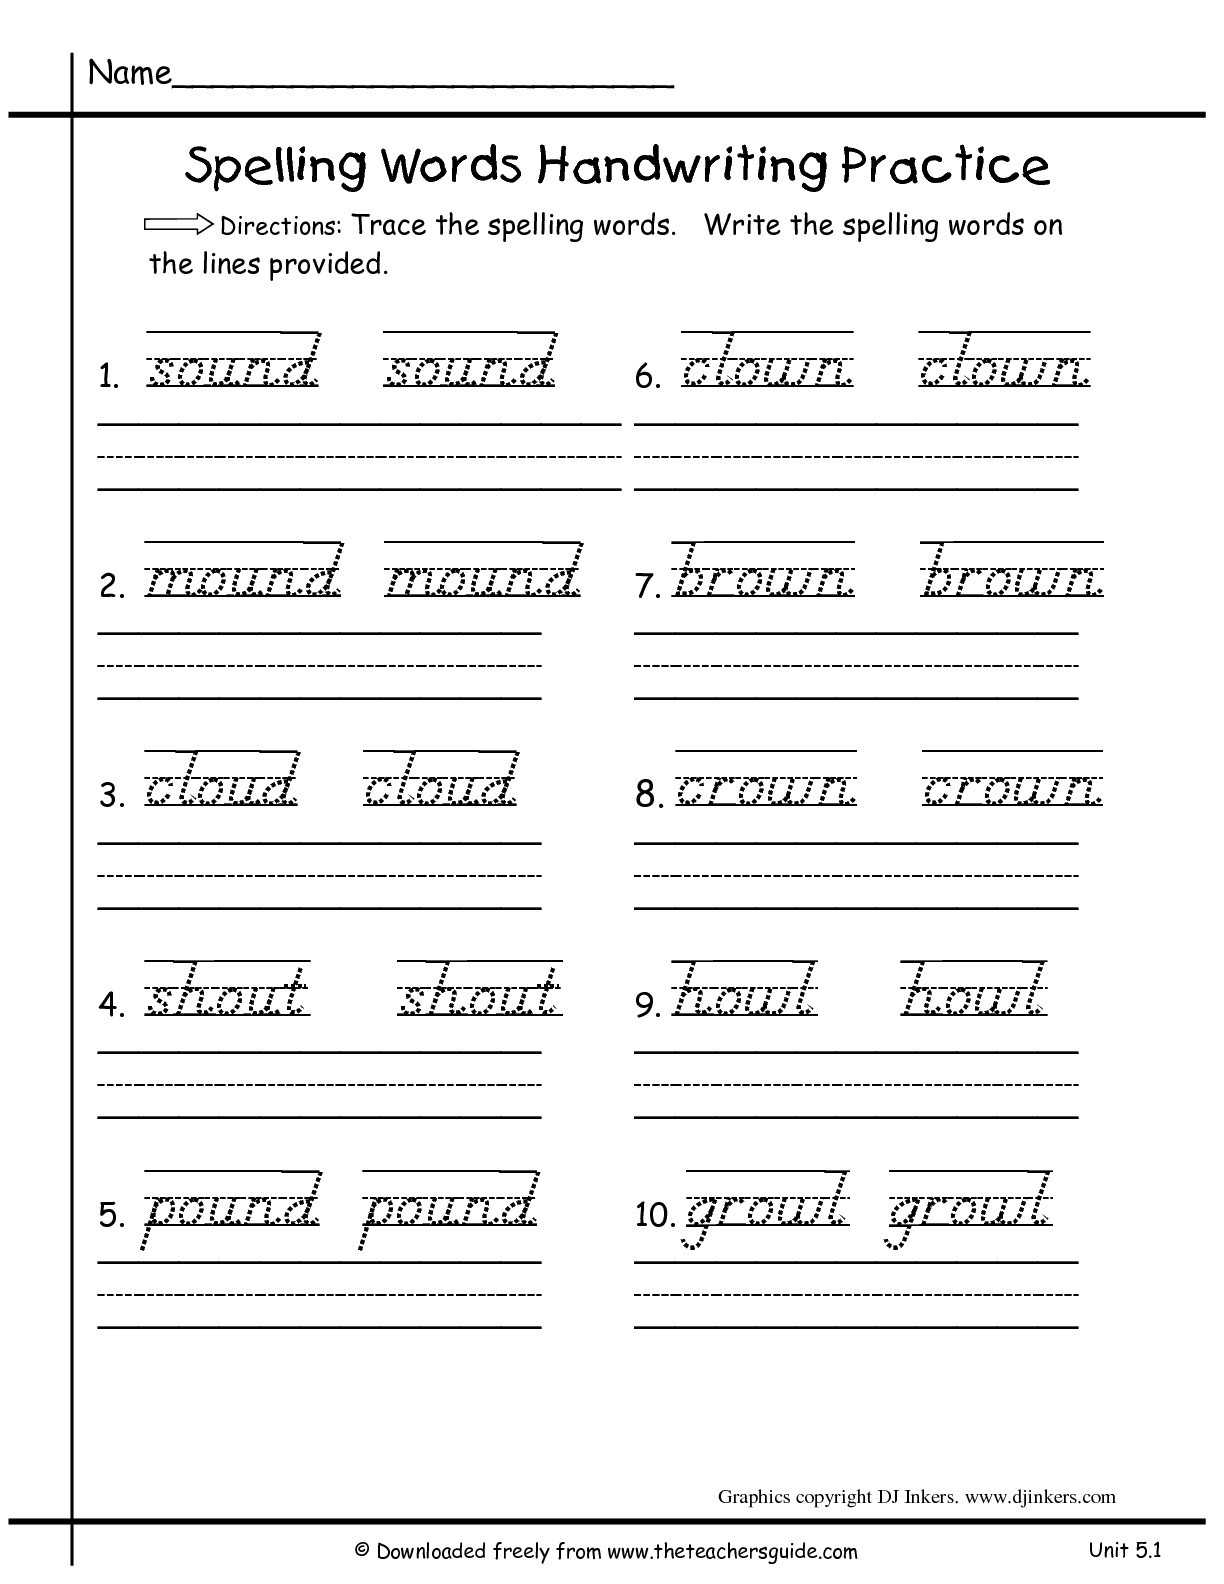 Drawing Conclusions Worksheets 3rd Grade or 32 Awesome 2nd Grade Tutoring Worksheets